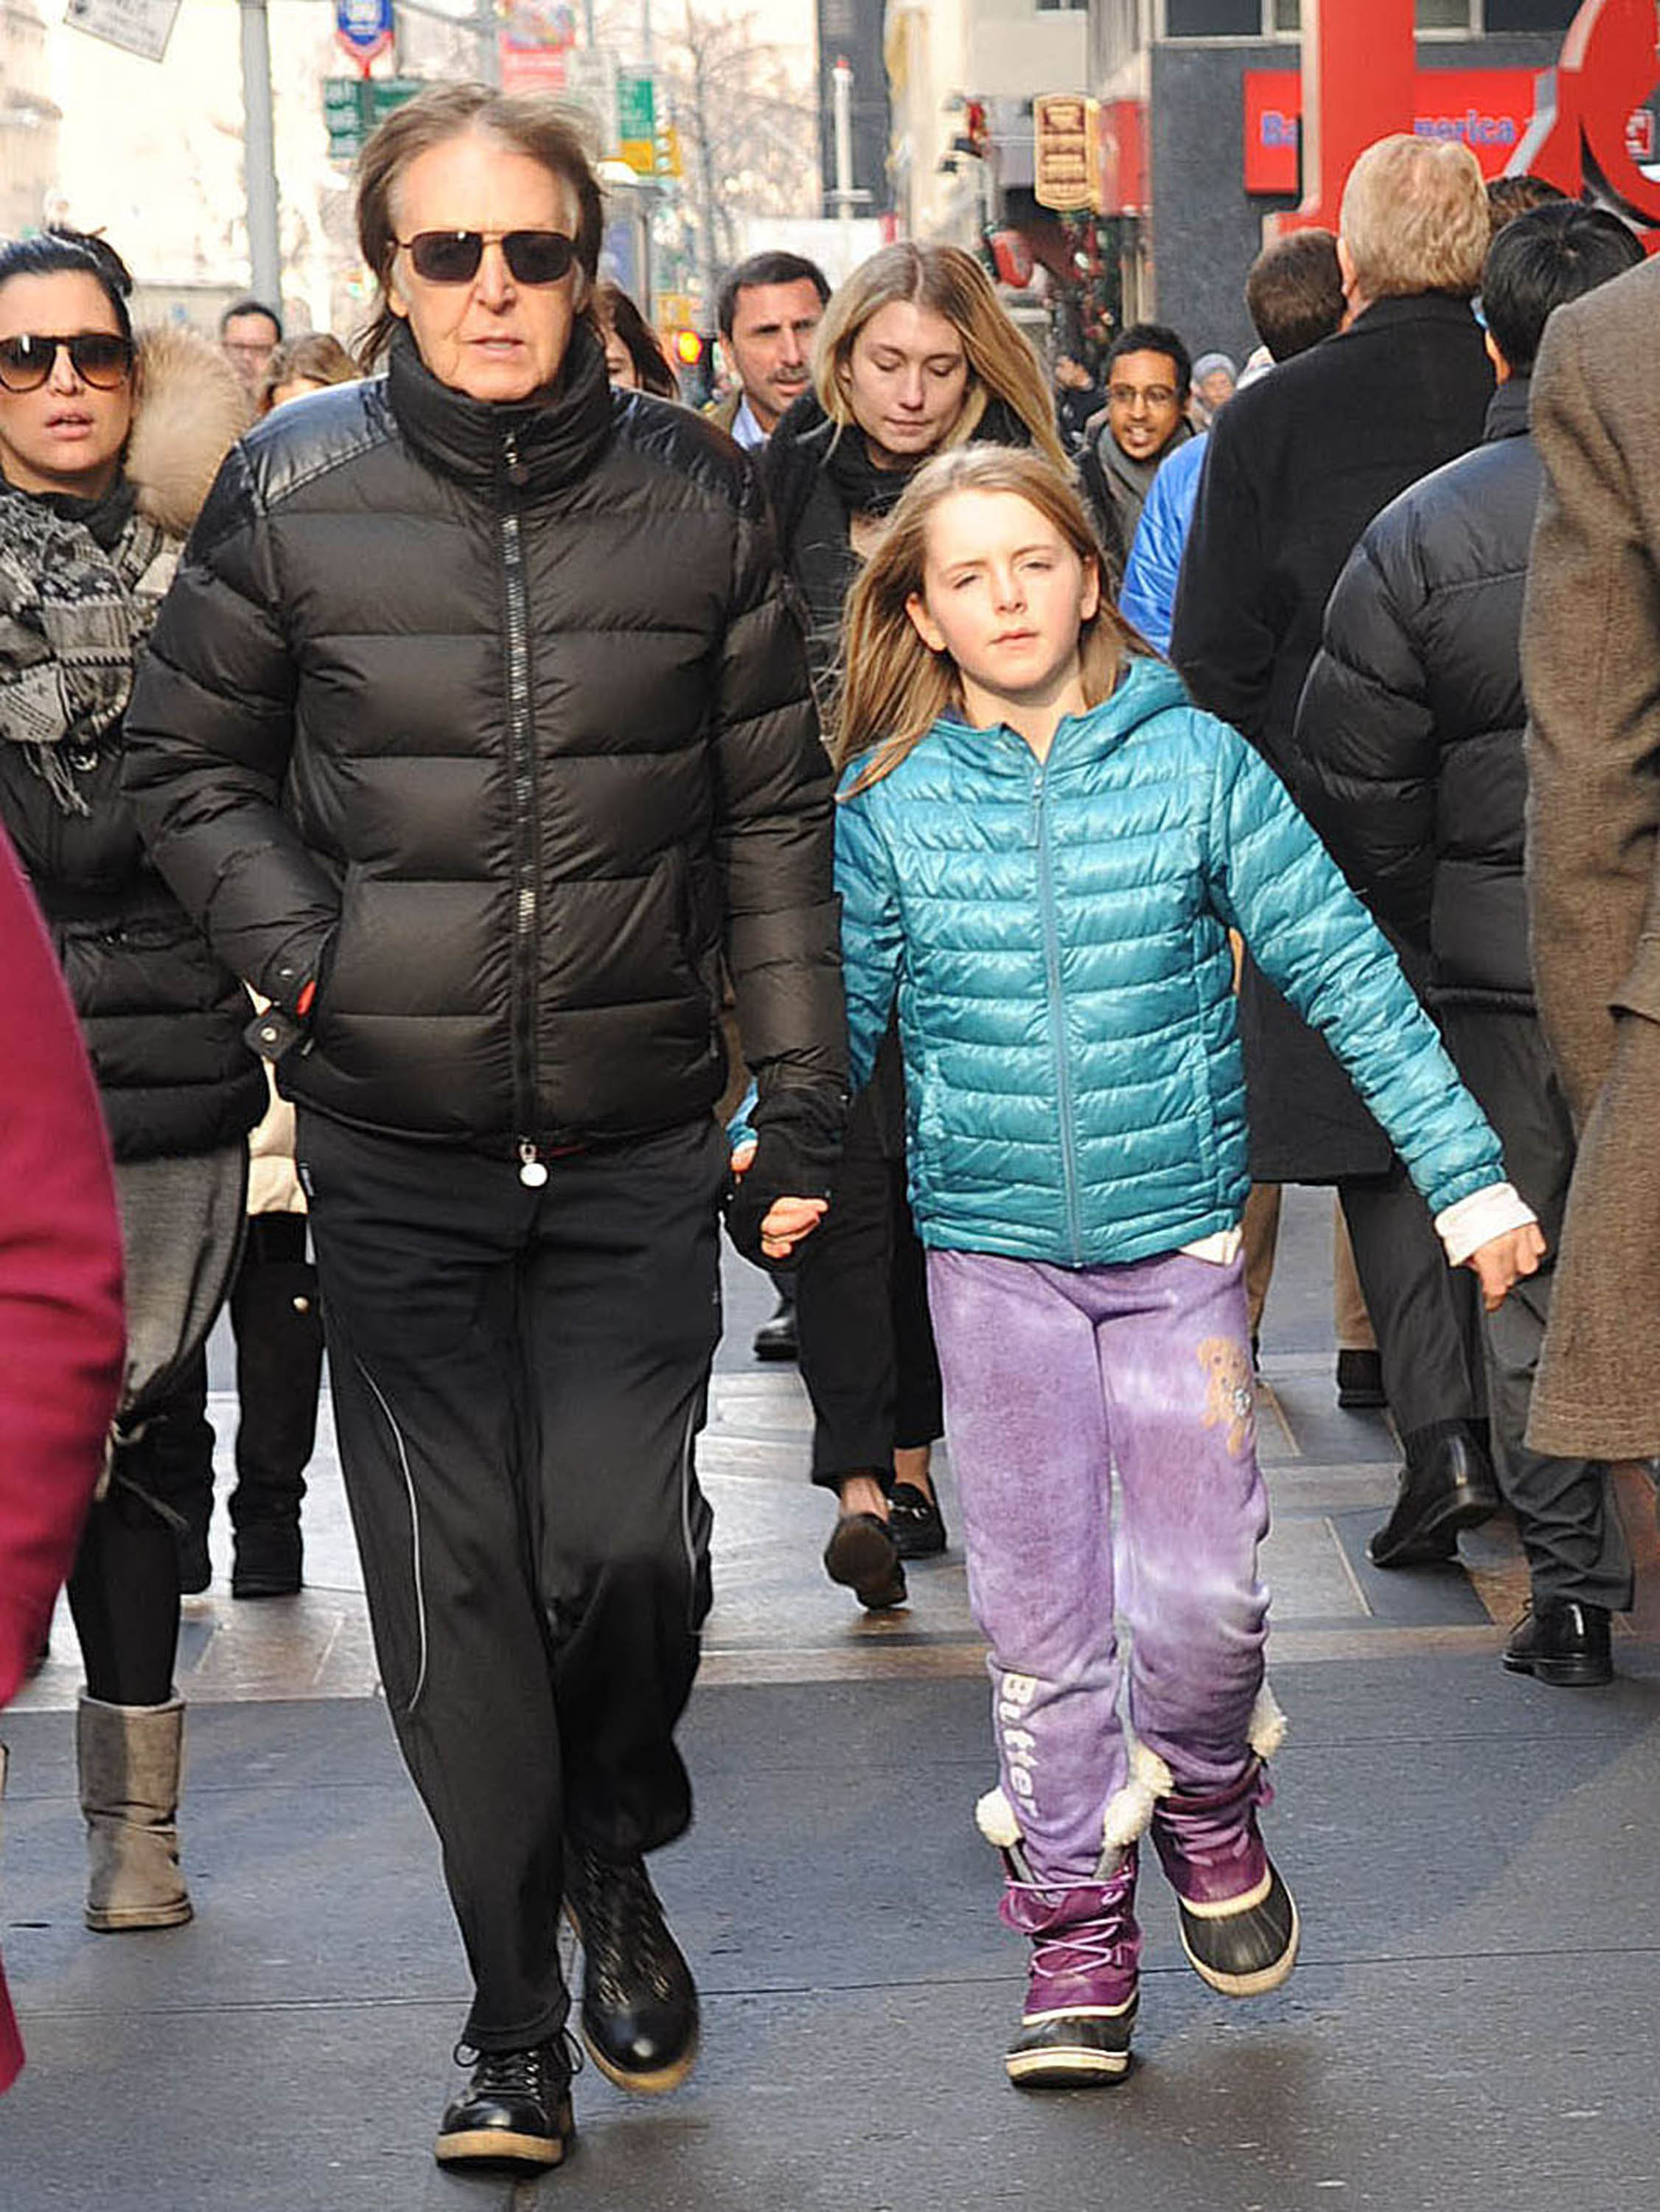  Musician Sir Paul McCartney and his daughter, Beatrice McCartney, are seen on December 19, 2013 in New York City. | Source: Getty Images